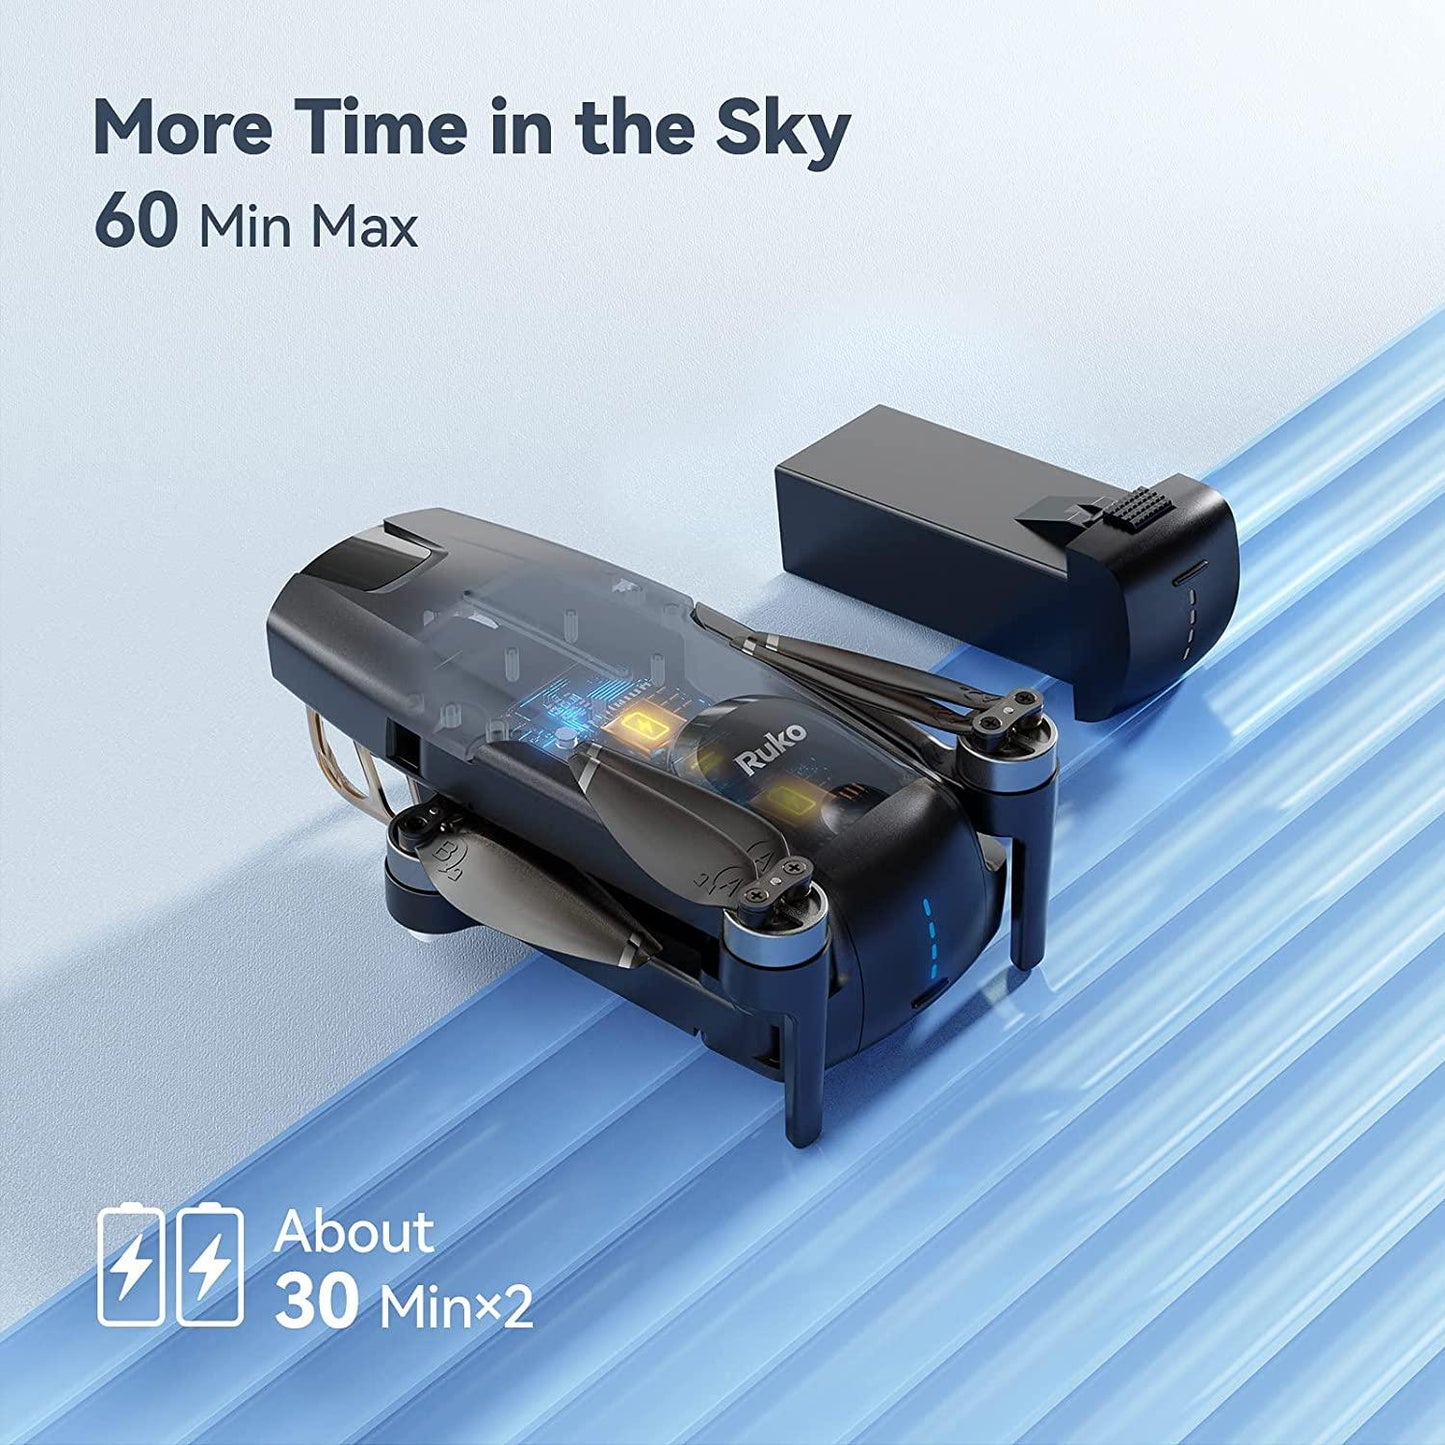 Ruko F11 MINI Drone - GPS 4K HD Camera for Adults, Less Than 0.55lbs Mini Drone Foldable 60 Min Flight Time FPV Quadcopter Brushless Motor UAV for Beginners 5Ghz WiFi Live Video Transmission Optical Flow RTH Follow Me Professional Camera Drone - RCDrone